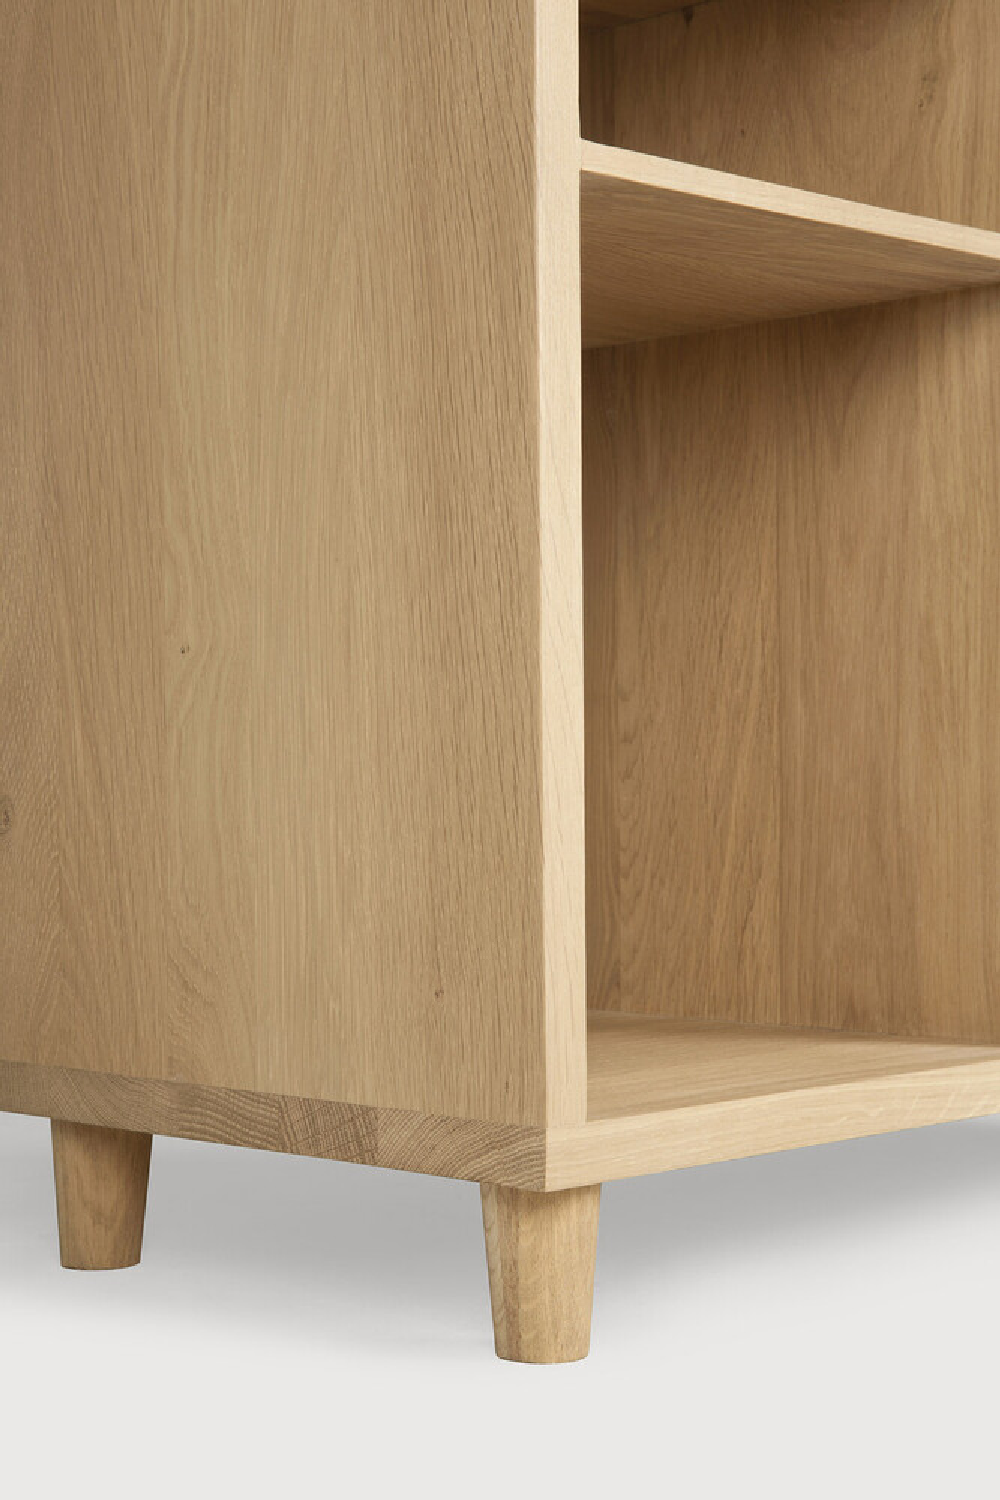 Oak Bookcase With Drawers | Ethnicraft Pirouette | Oroa.com